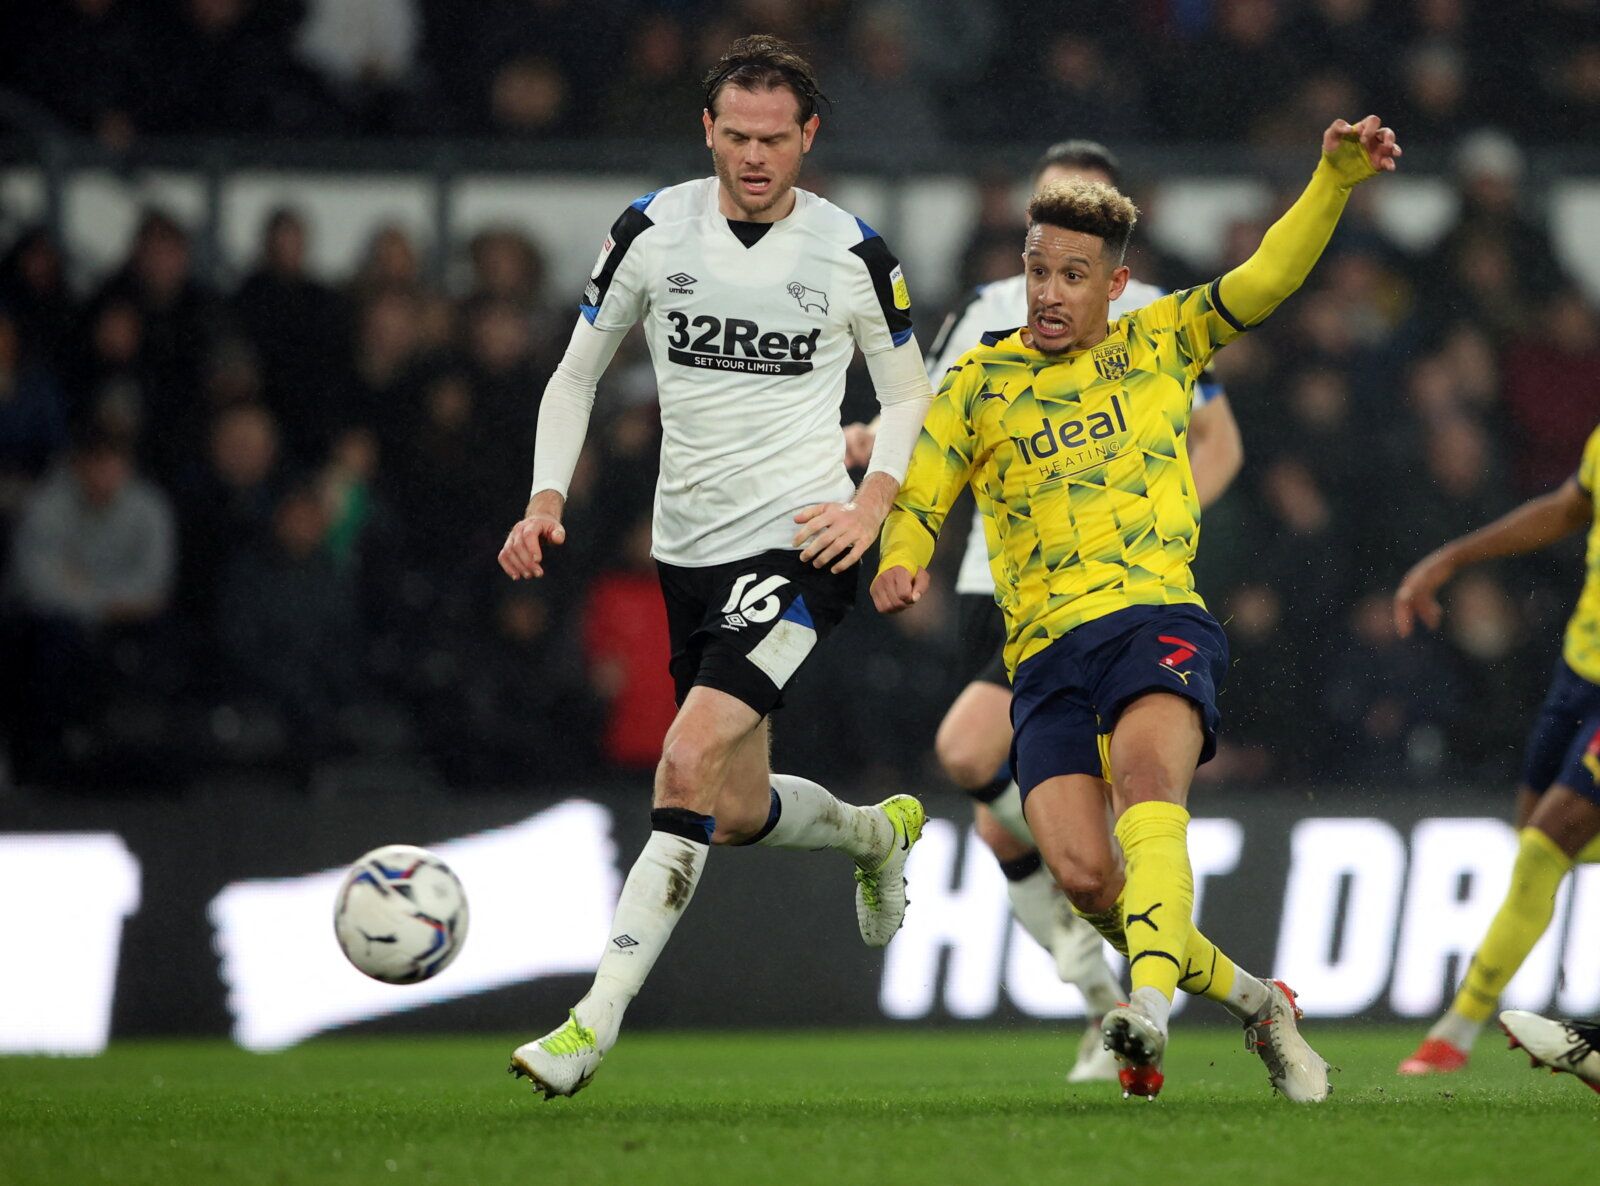 Soccer Football - Championship - Derby County v West Bromwich Albion - Pride Park, Derby, Britain - December 27, 2021 West Bromwich Albion's Callum Robinson shoots at goal  Action Images/Molly Darlington  EDITORIAL USE ONLY. No use with unauthorized audio, video, data, fixture lists, club/league logos or "live" services. Online in-match use limited to 75 images, no video emulation. No use in betting, games or single club/league/player publications.  Please contact your account representative for